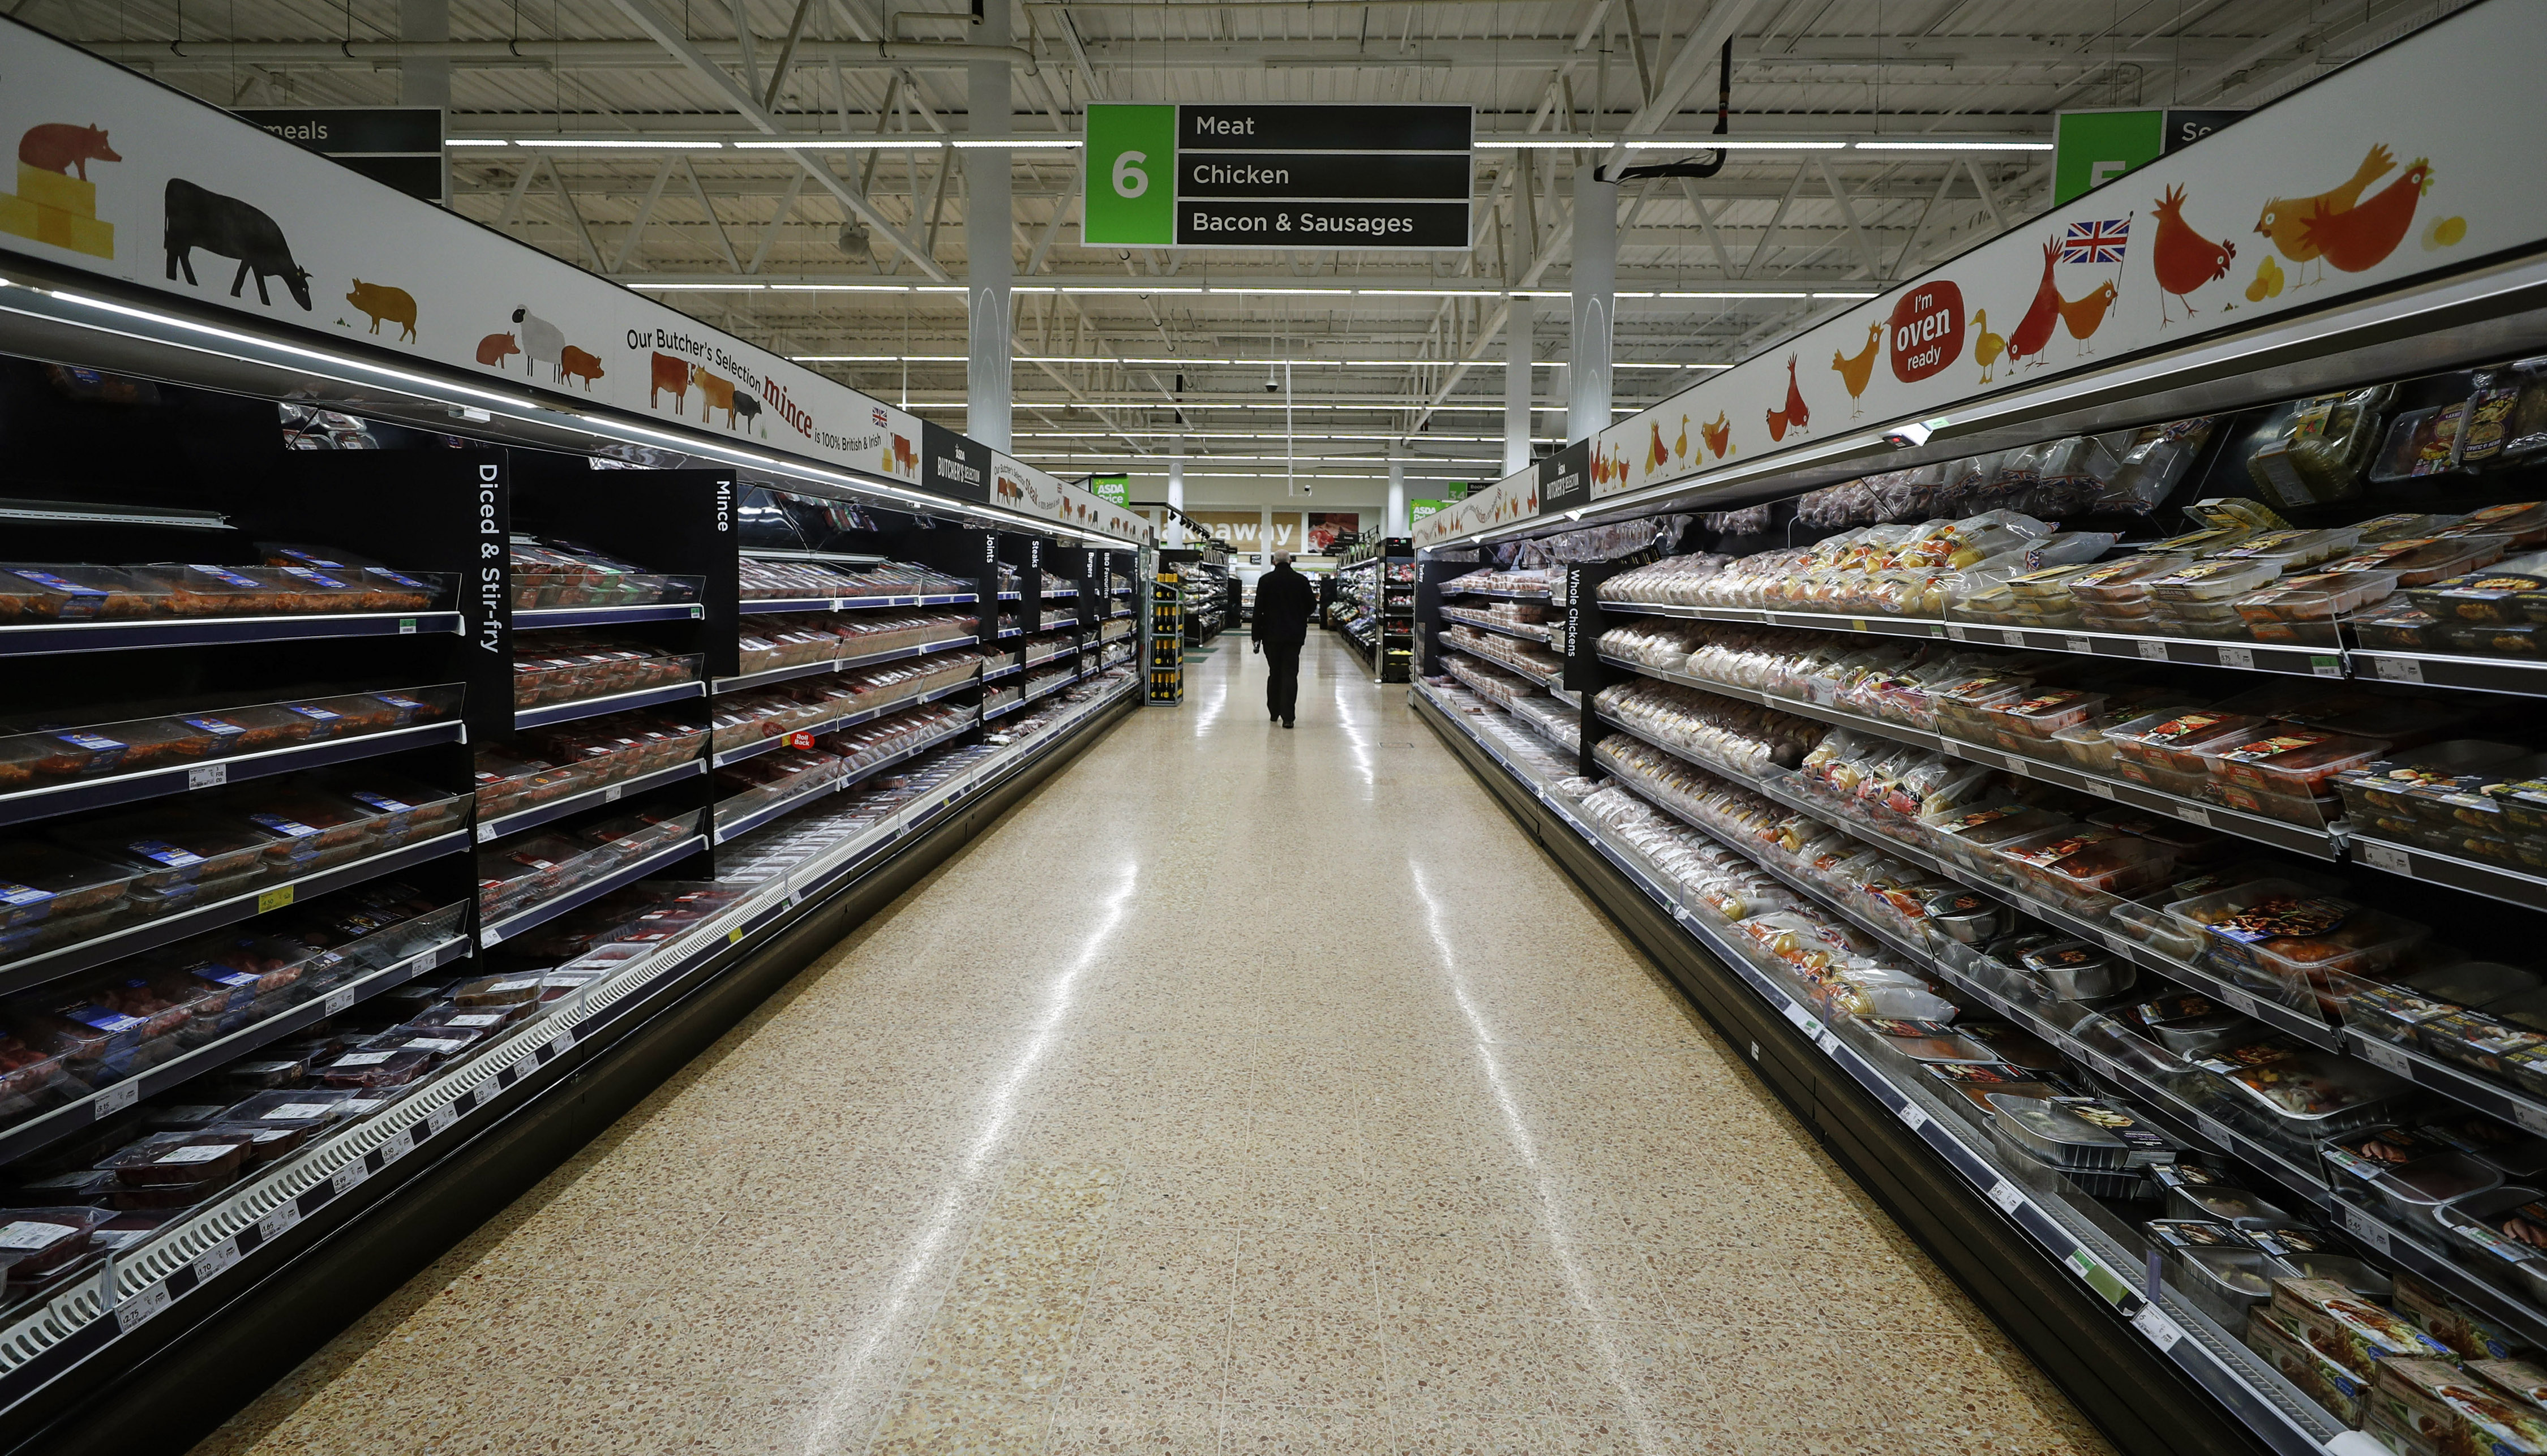 A shopper walks through the meat section at the Asda superstore in High Wycombe